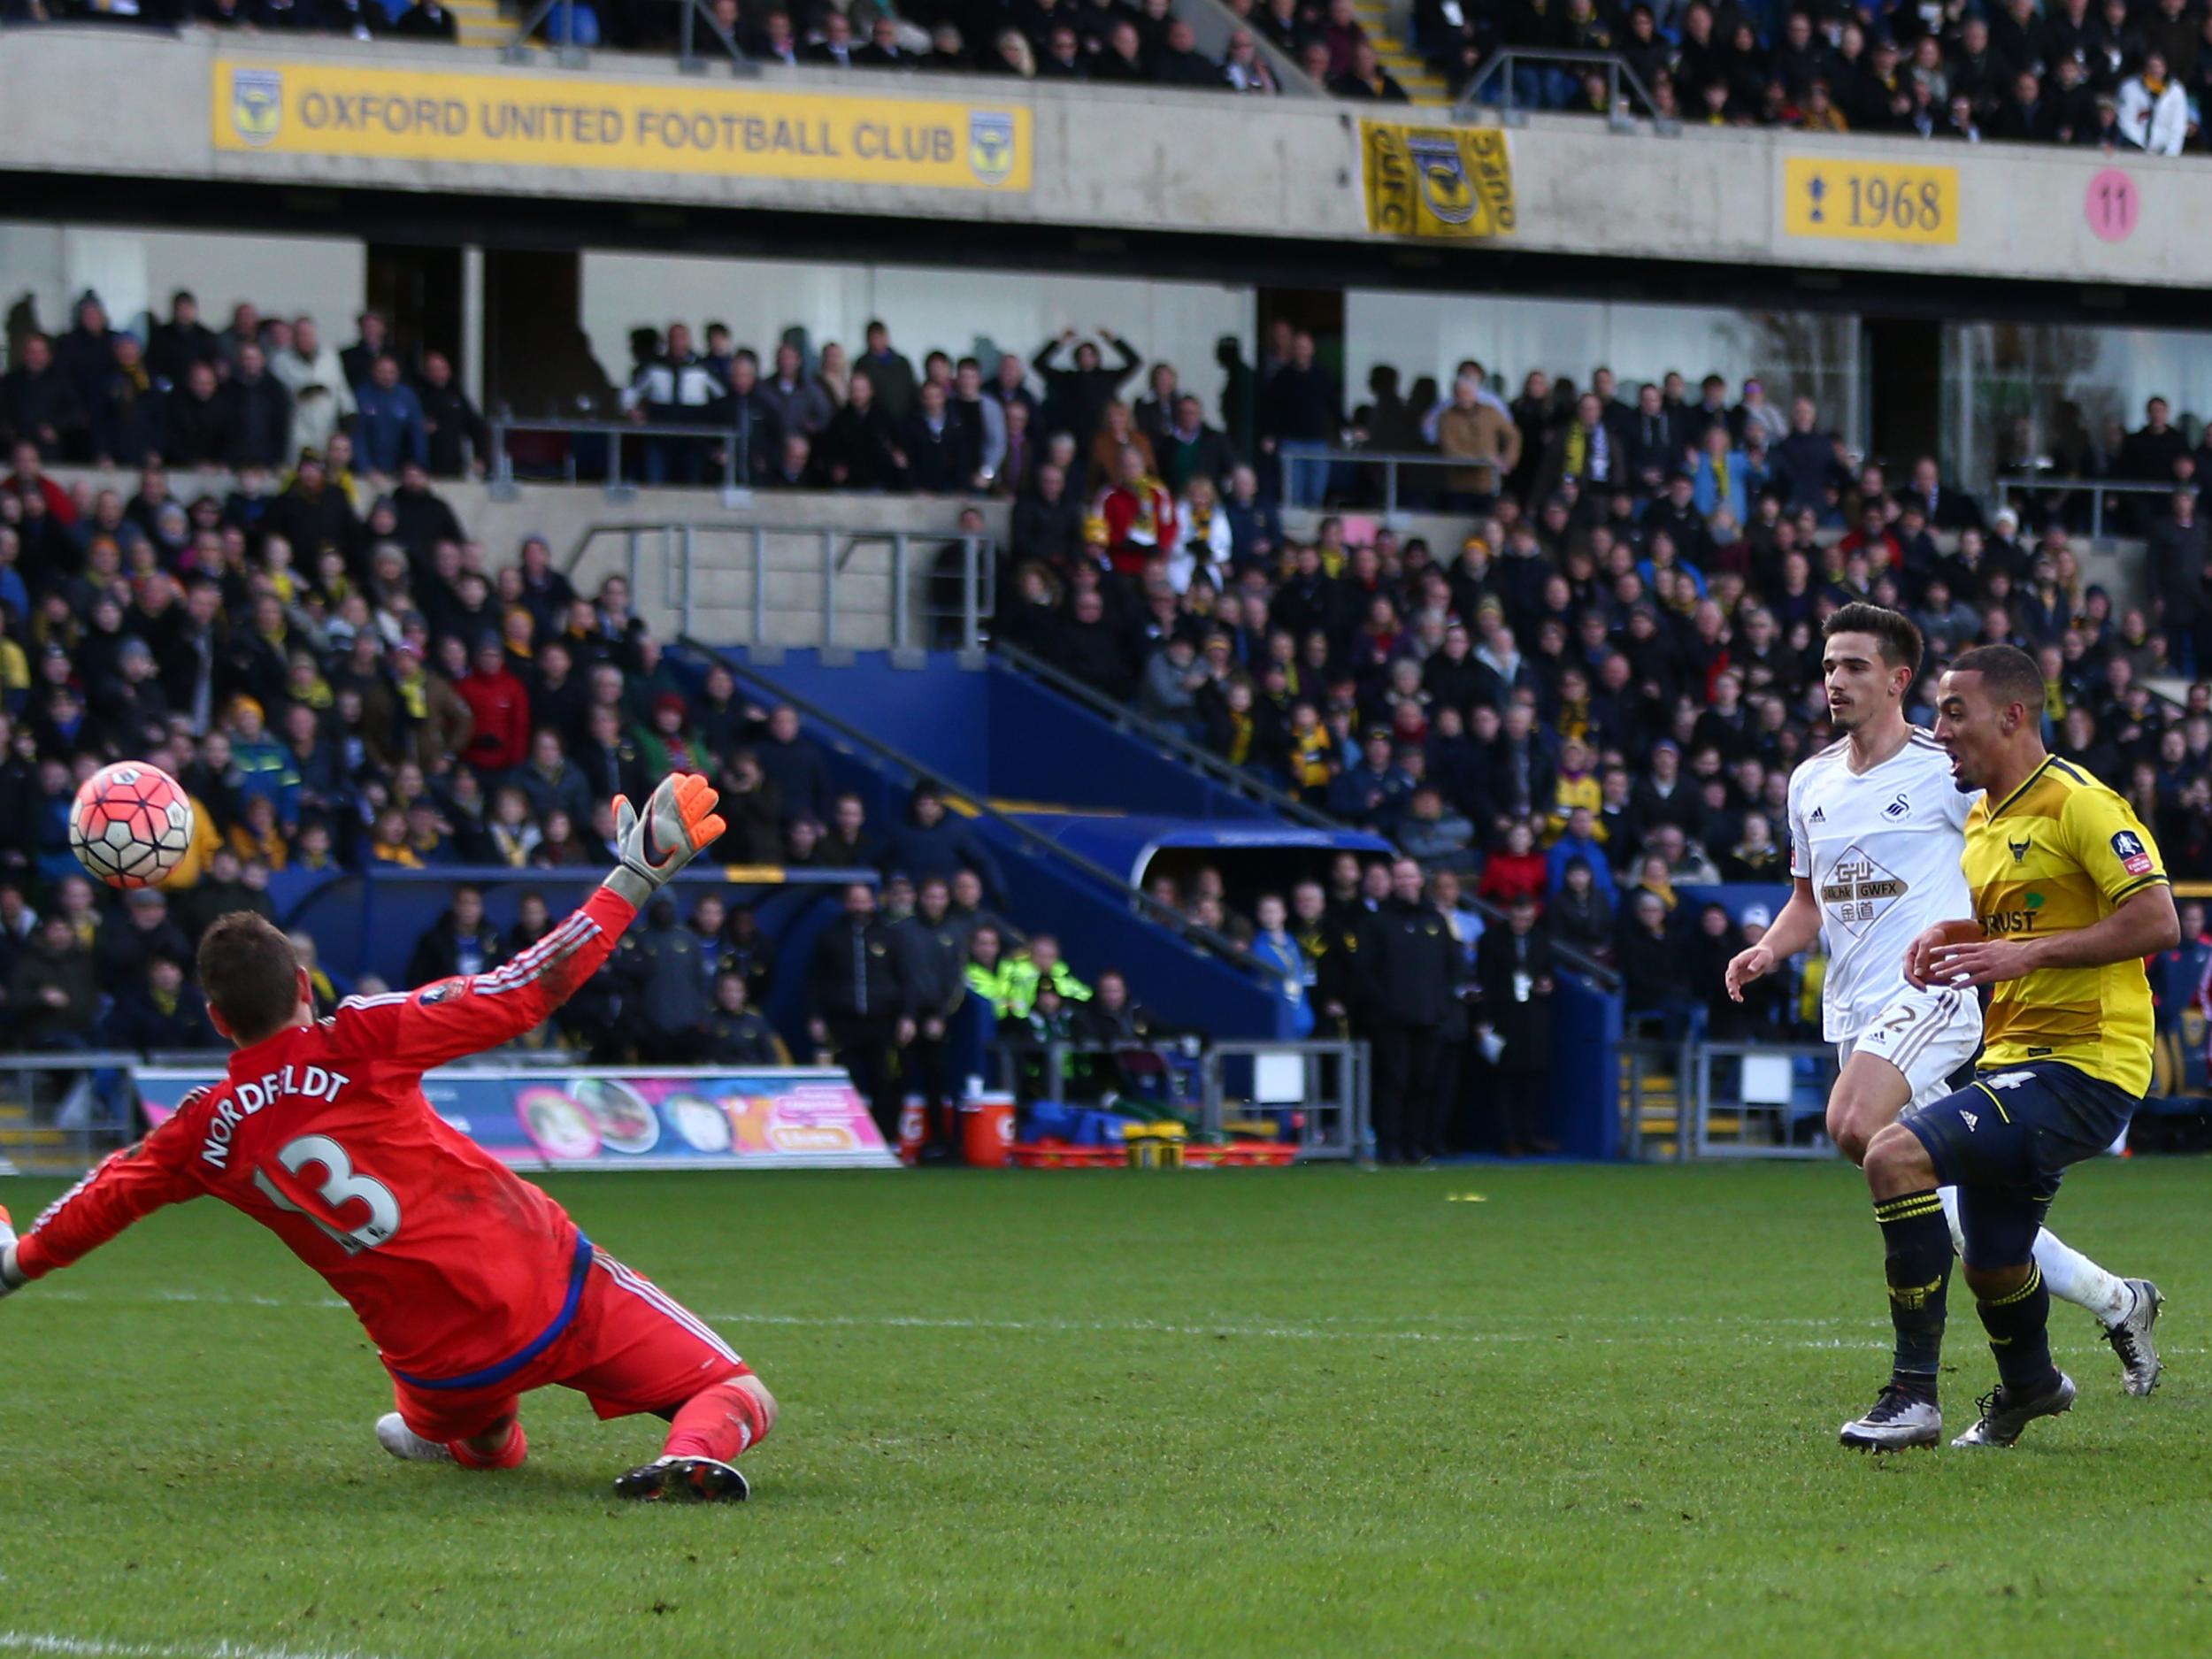 Kemar Roofe scores for Oxford